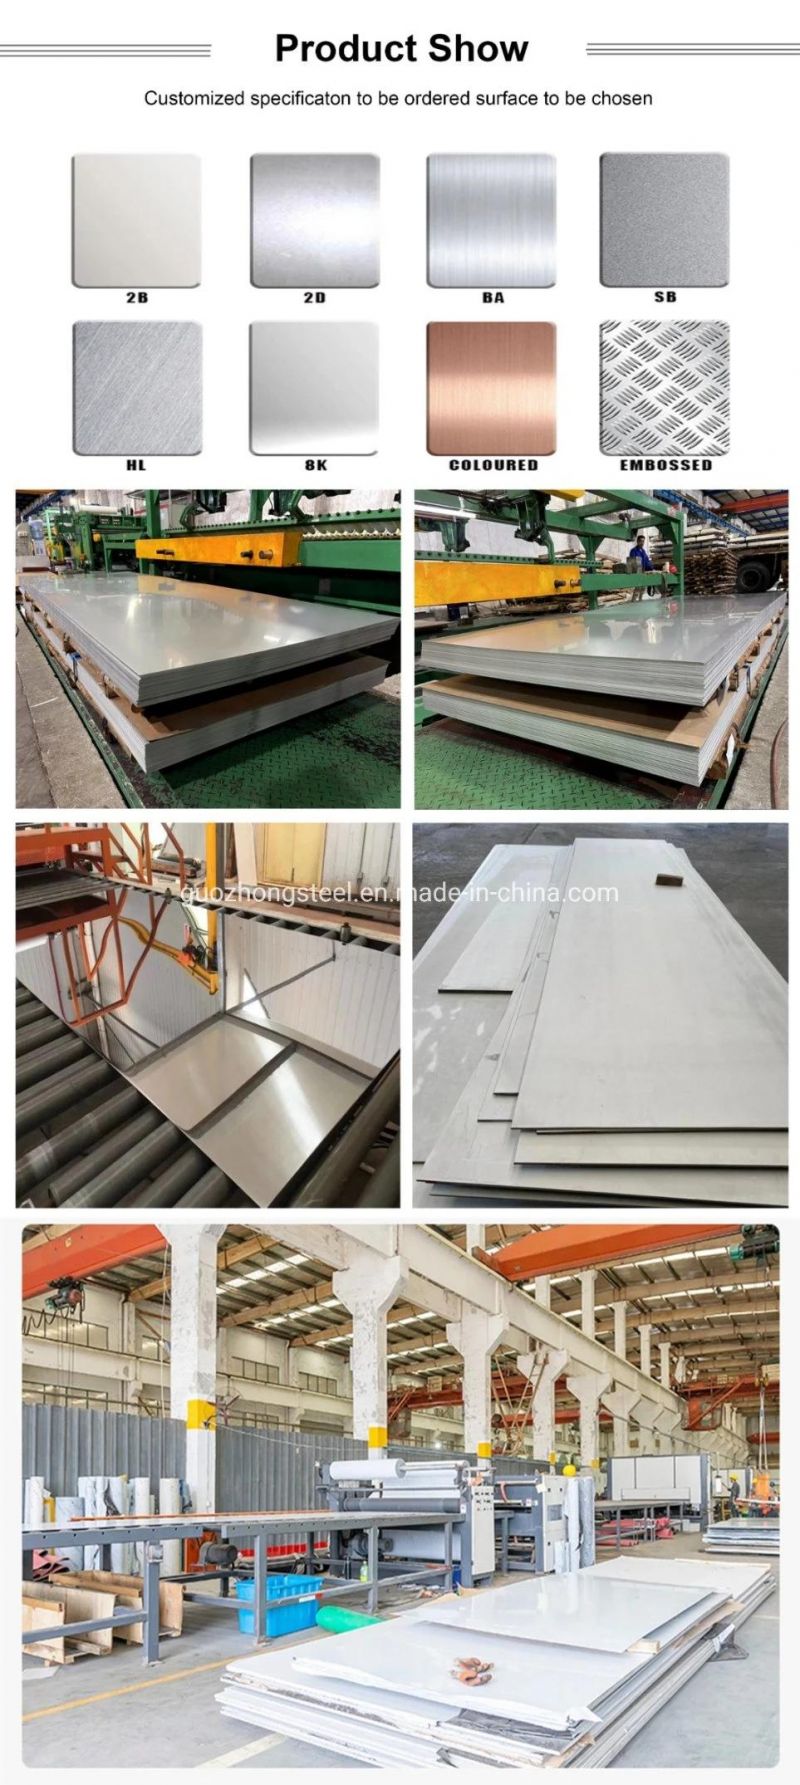 ASTM B209 Stainless Steel Punching Plate Coil in Stock